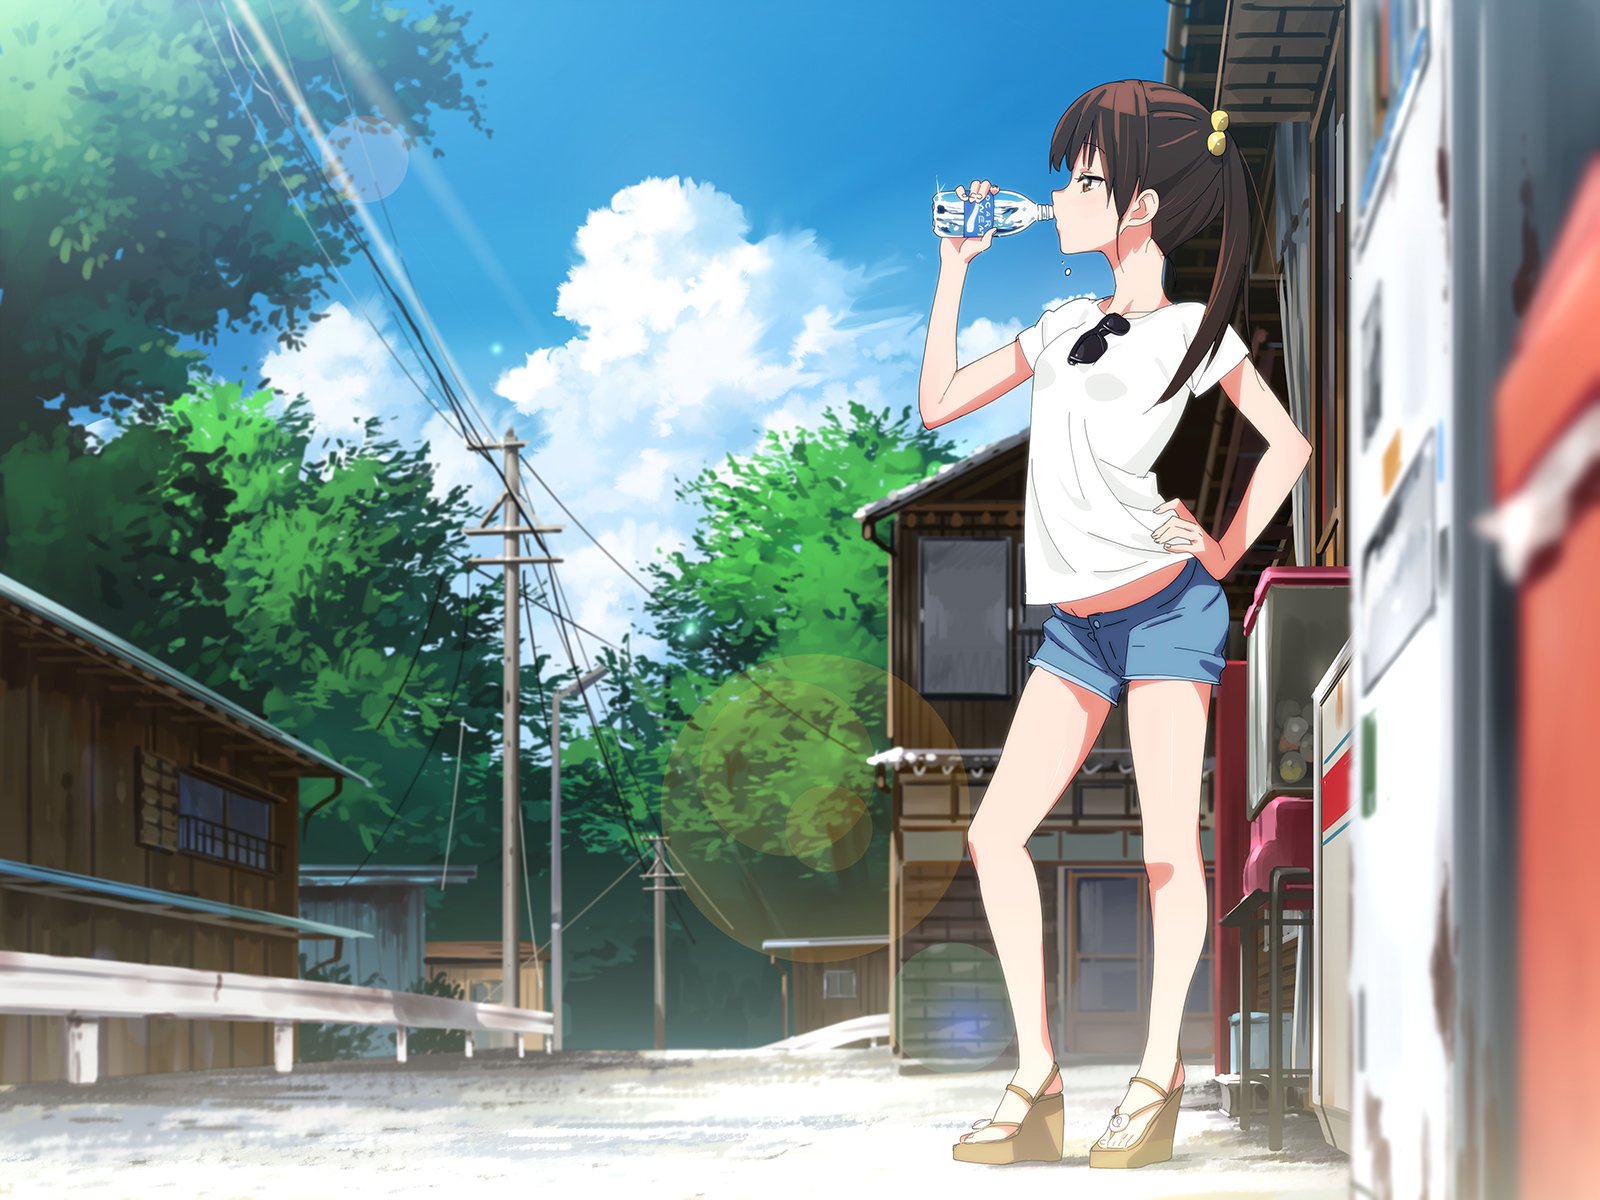 brown, Hair, Building, Clouds, Drink, Itoshige, Original, Ponytail, Shorts, Summer, Sunglasses, Tree Wallpaper